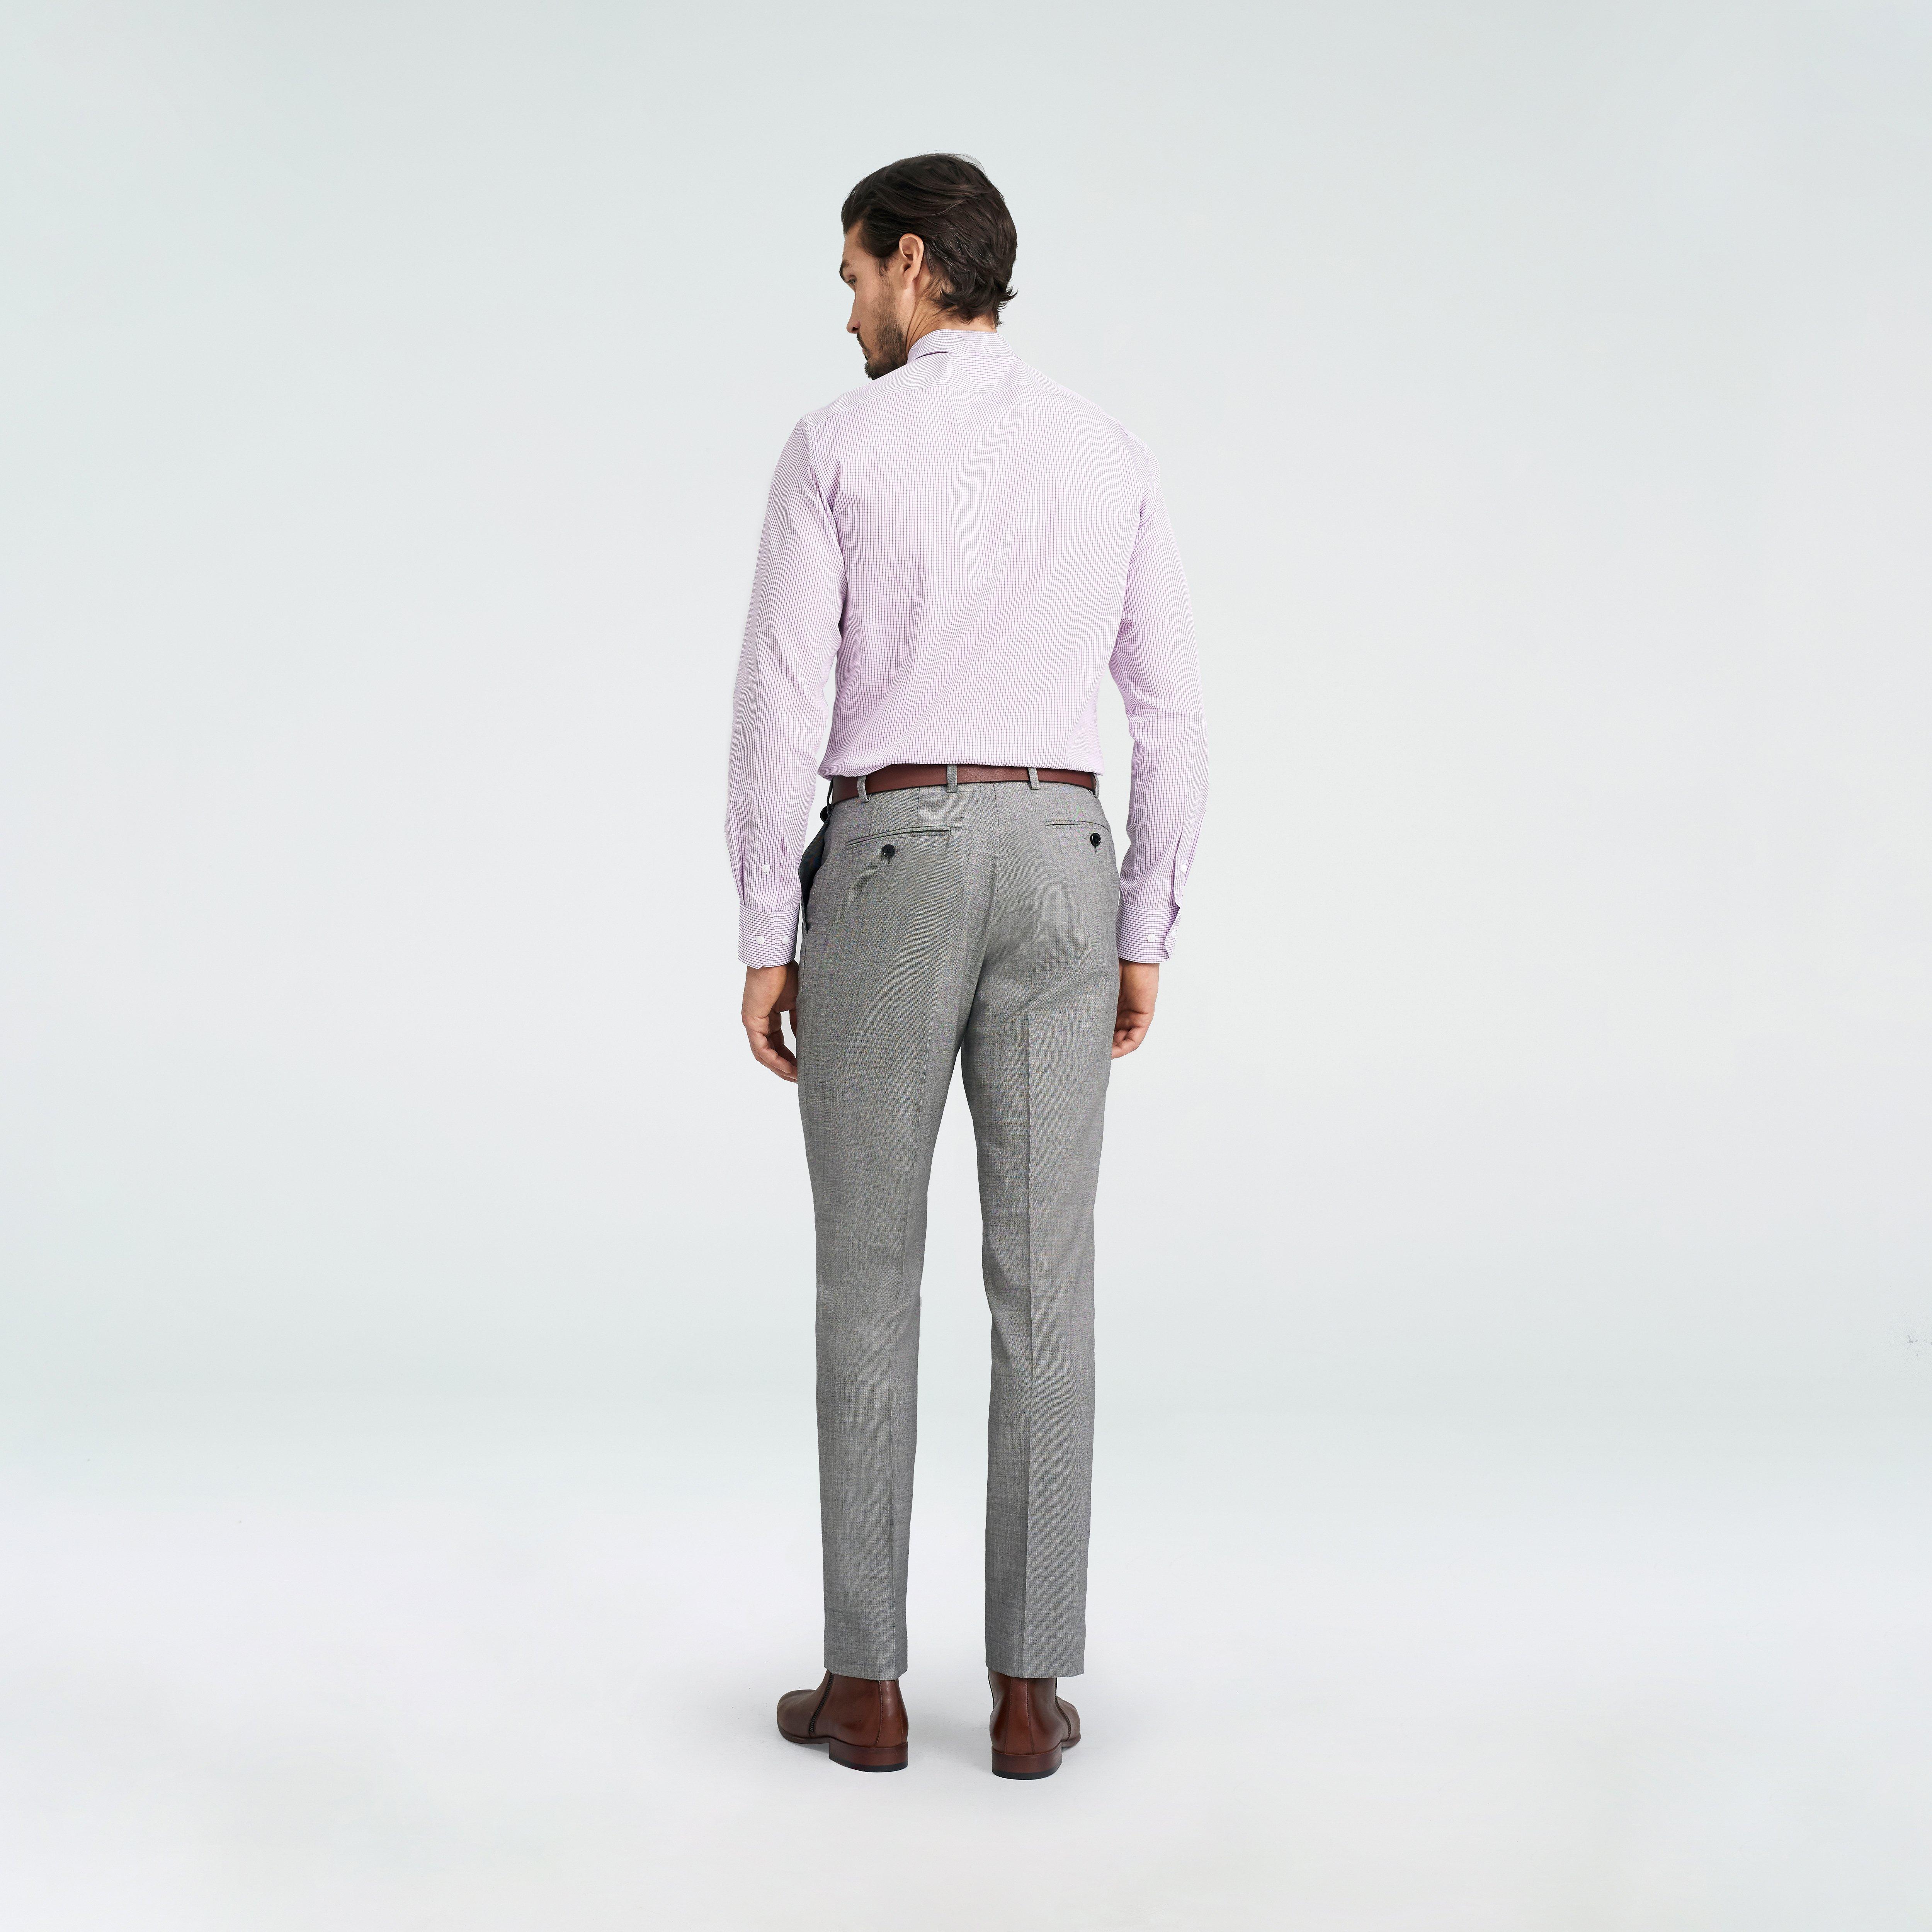 Custom Suits Made For You - Hayle Sharkskin Light Gray Suit | INDOCHINO